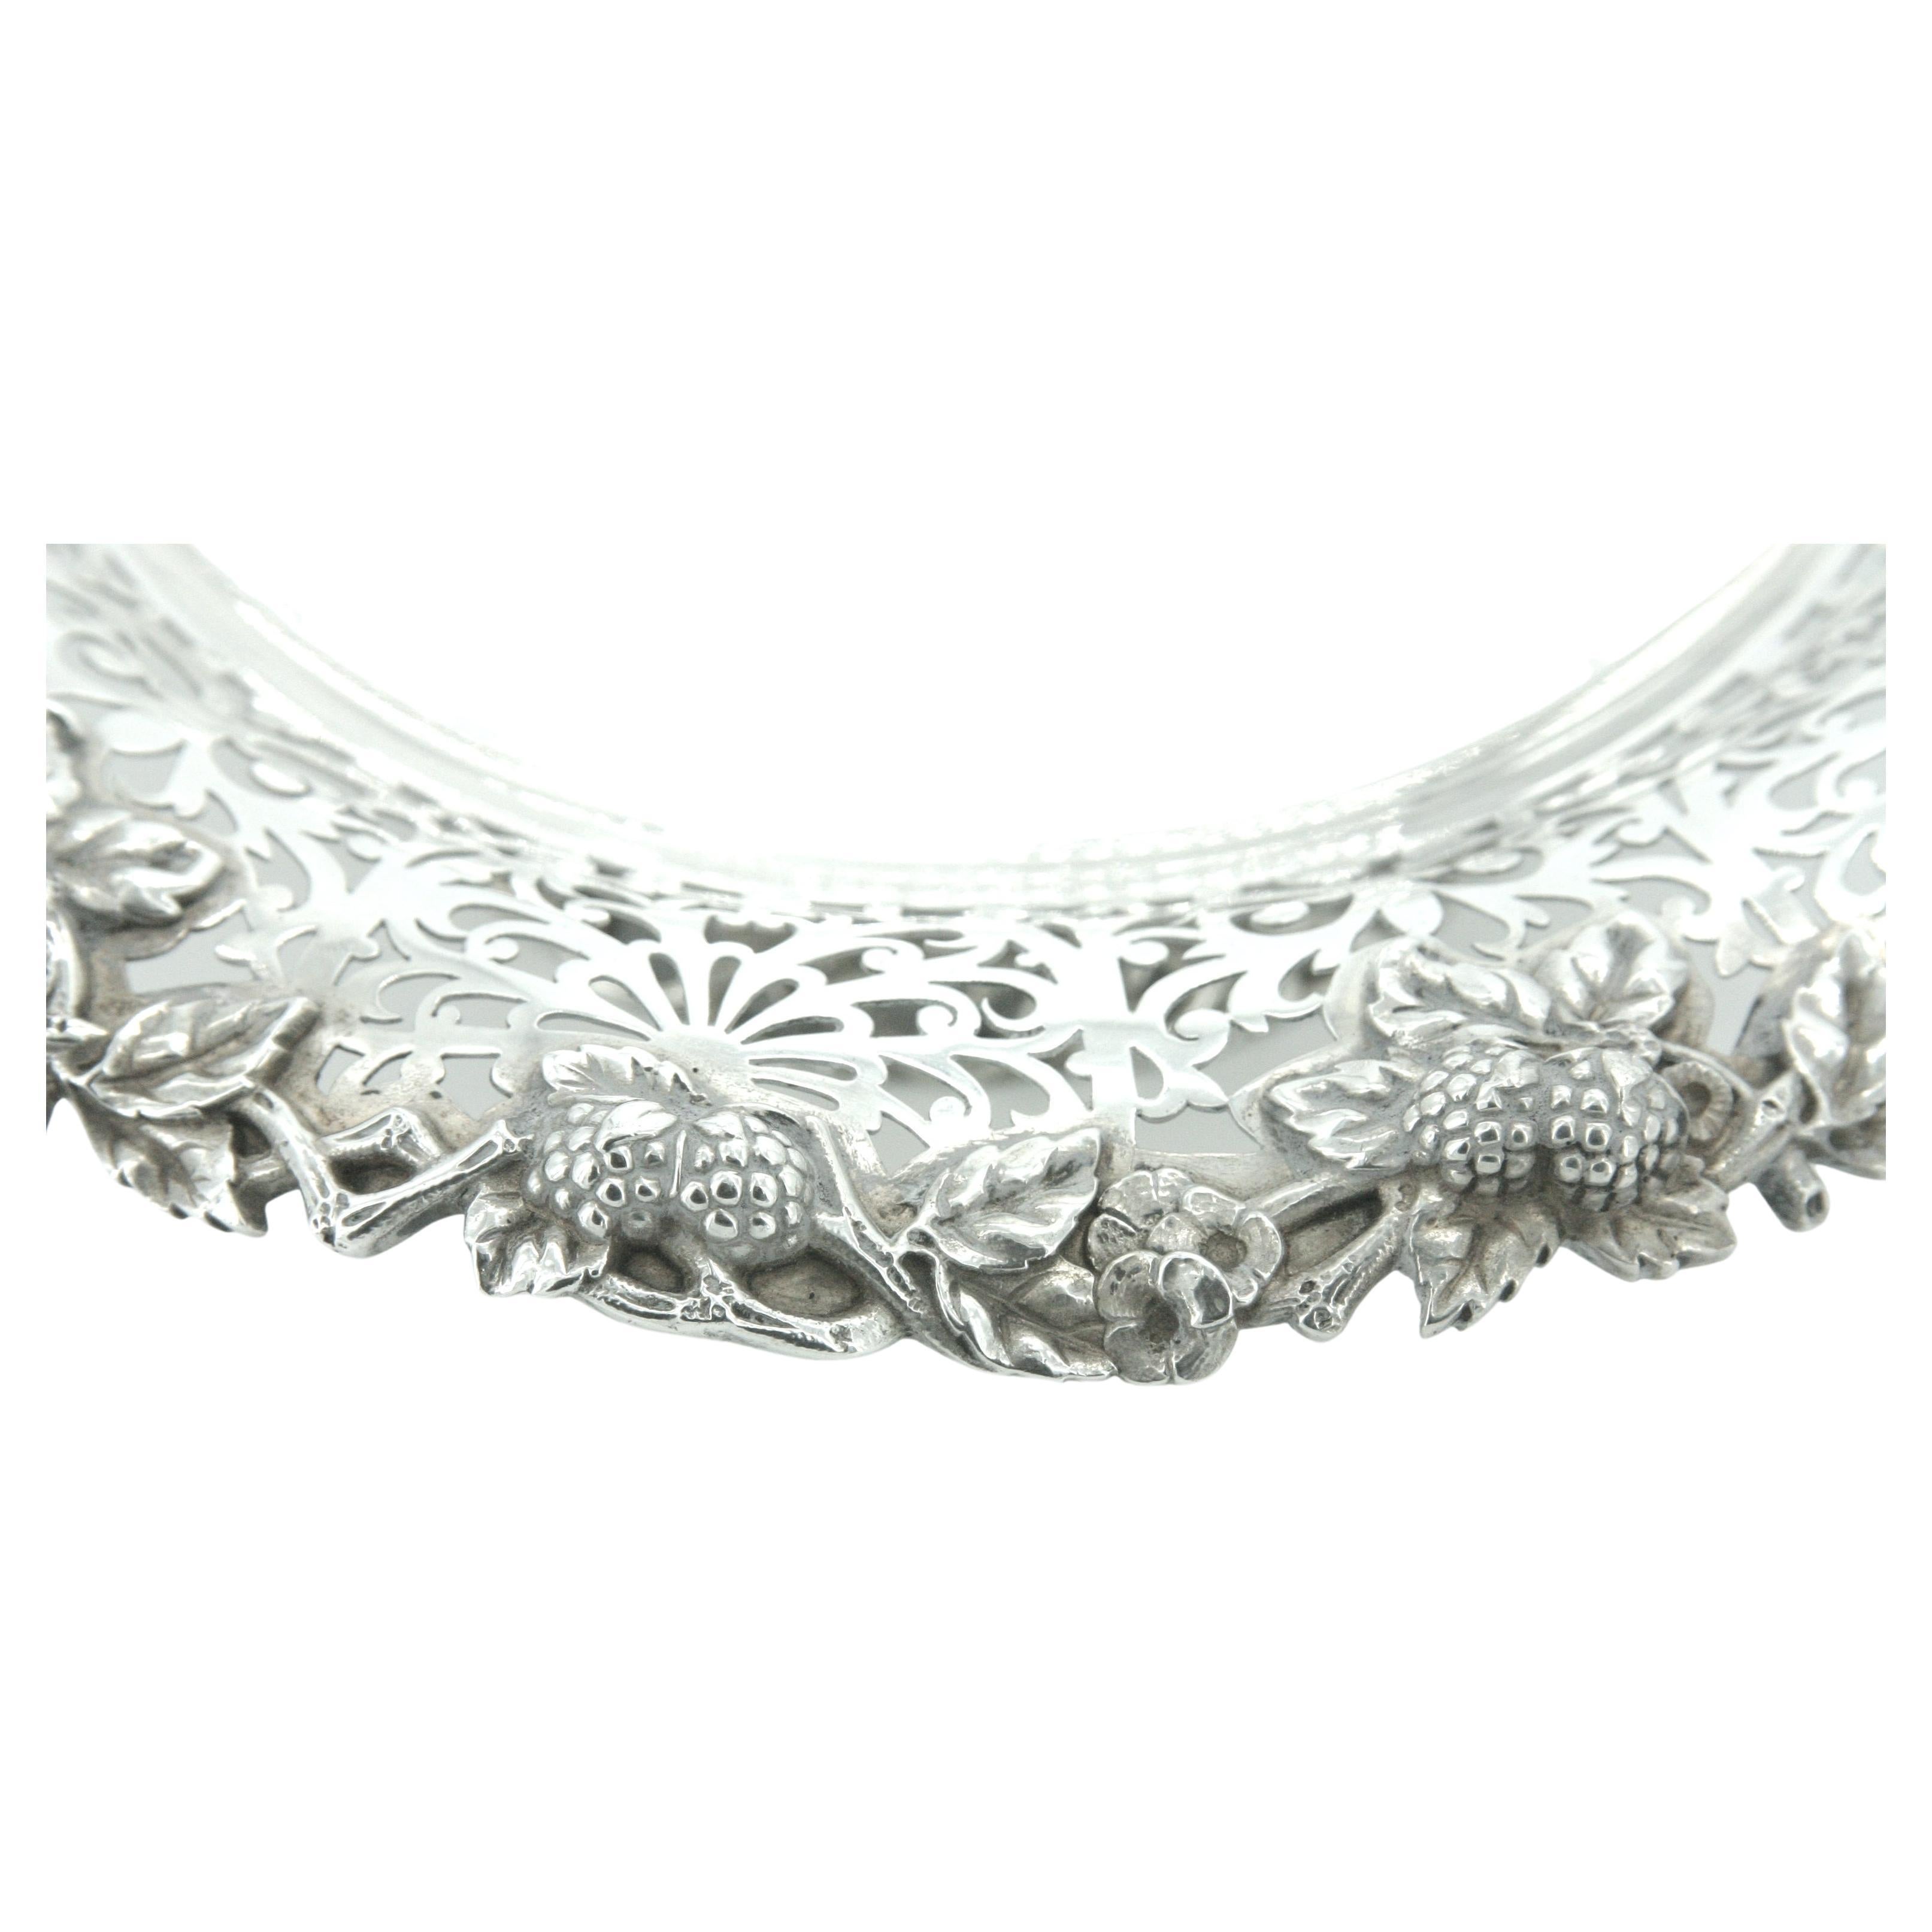 Tiffany Sterling Silver Tableware Serving Piece For Sale 4